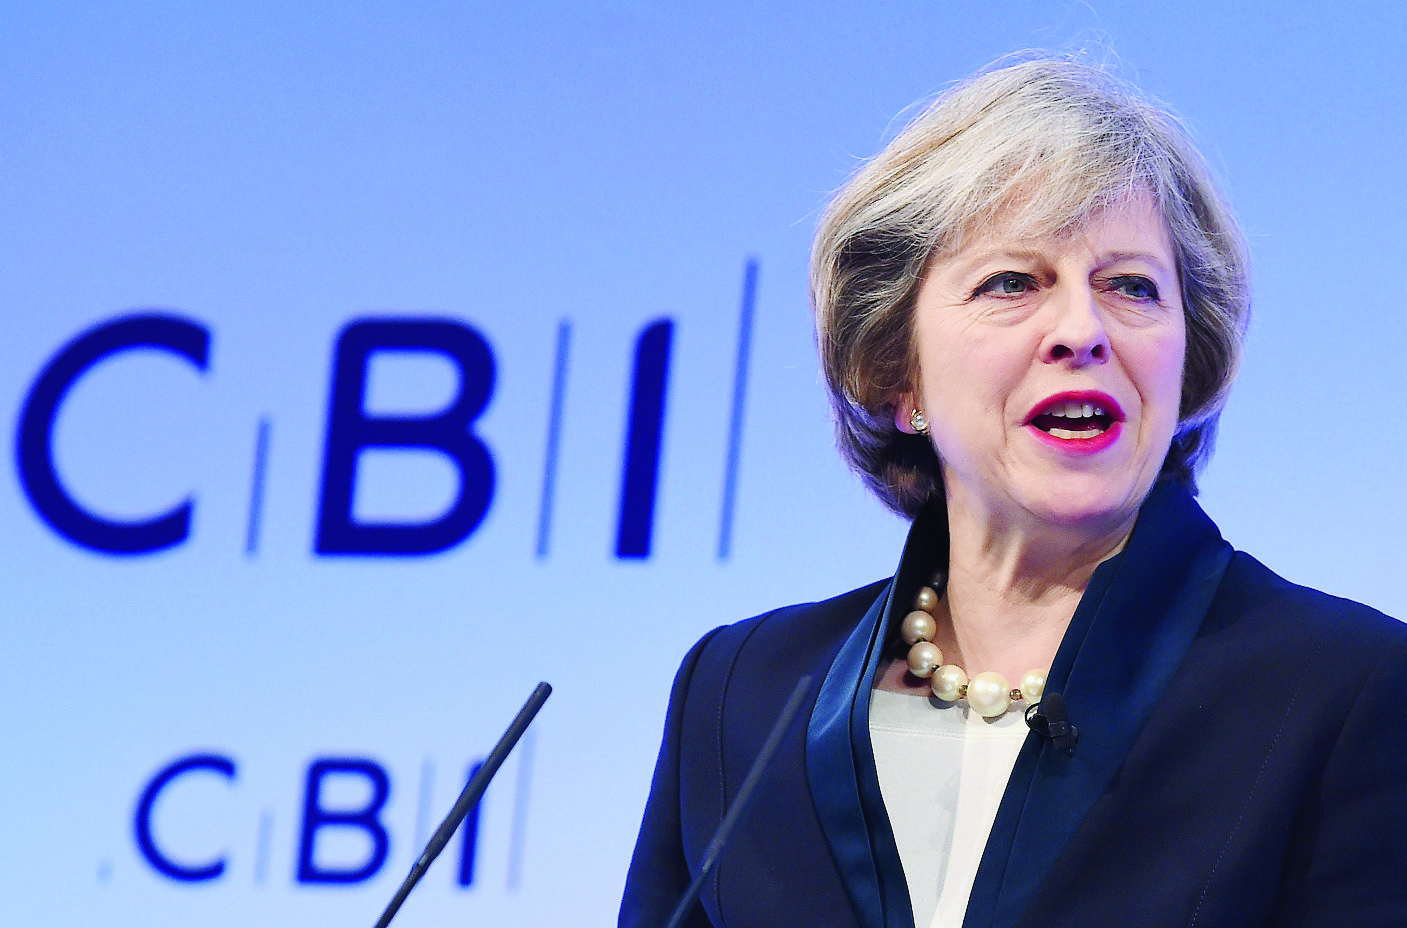 epa05640890 British Prime Minister Theresa May delivers a speech on Brexit and the British economy at the Confederation of British Industry (CBI) annual conference in central London, Britain, 21 November 2016.  EPA/ANDY RAIN BRITAIN ECONOMY CBI CONFERENCE